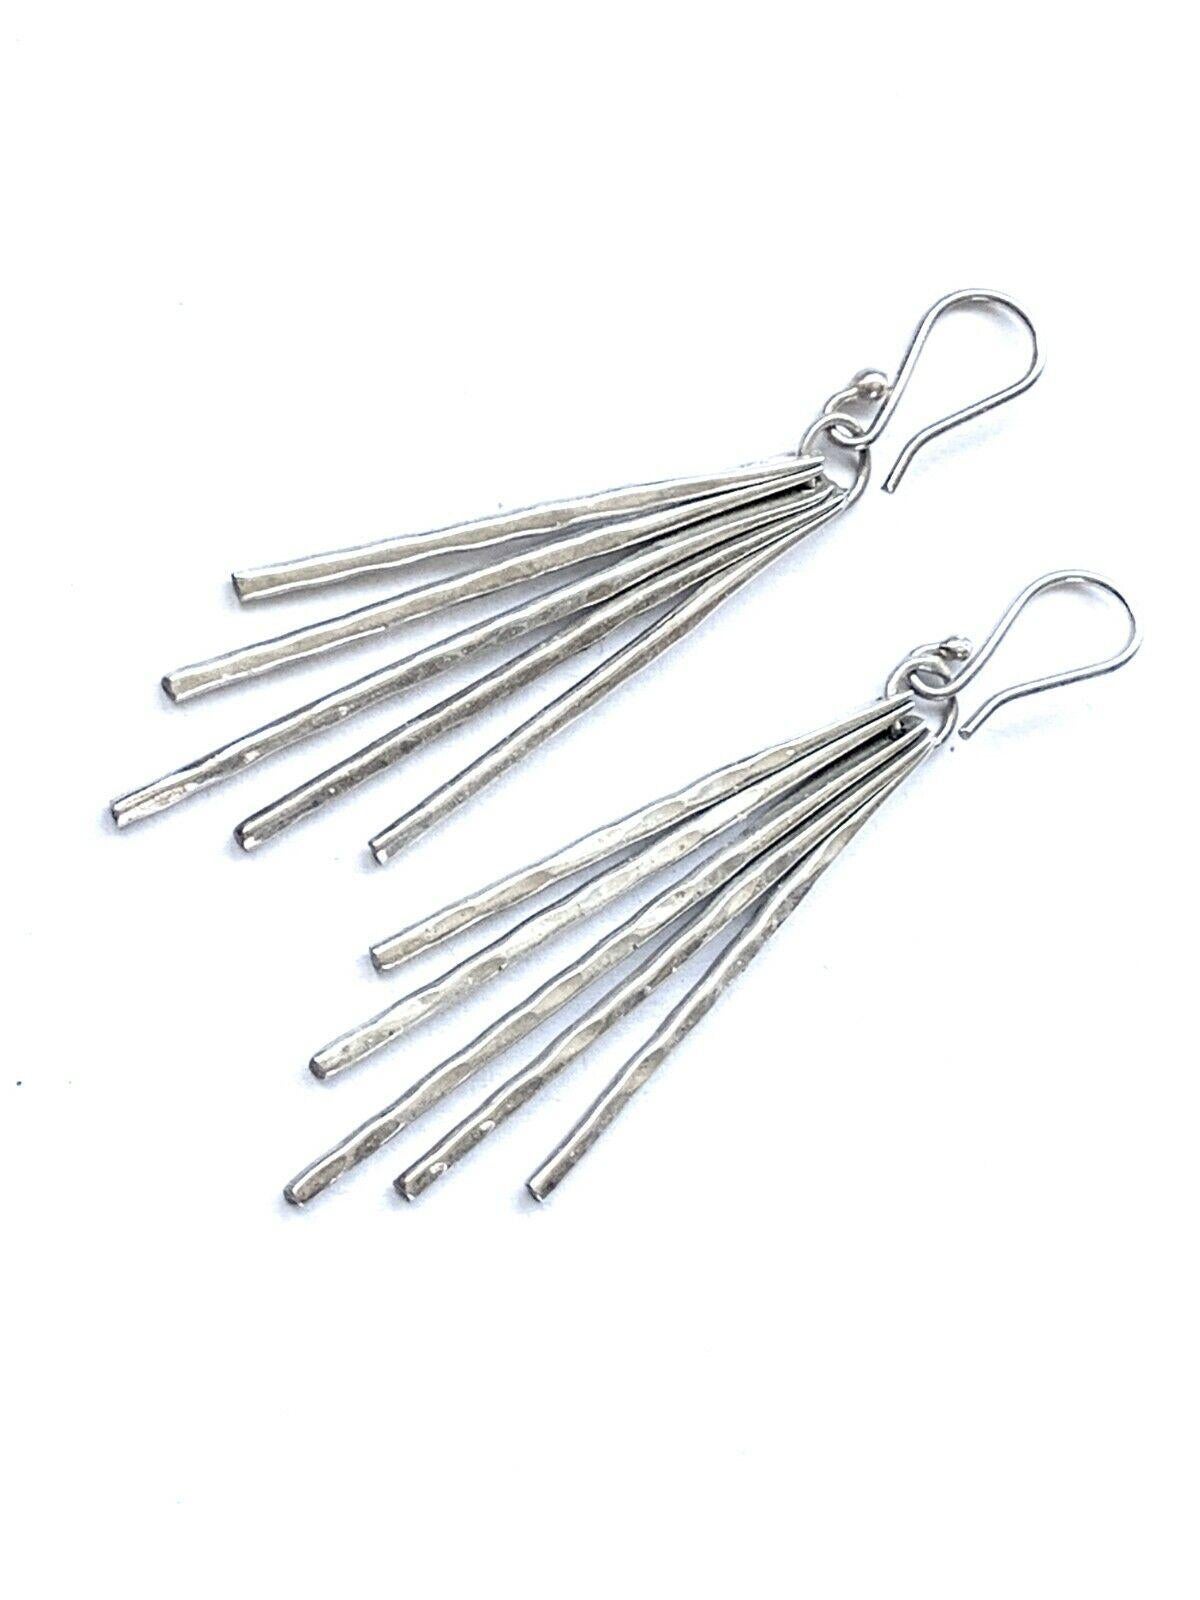 Beautiful dangling - each piece moves freely
Handmade artisan earrings
each section is solid silver and one is stamped 925
with original Shepard hooks
Large but not too heavy - quite comfortable .
Chic artisan appeal
with a beautiful smooth high